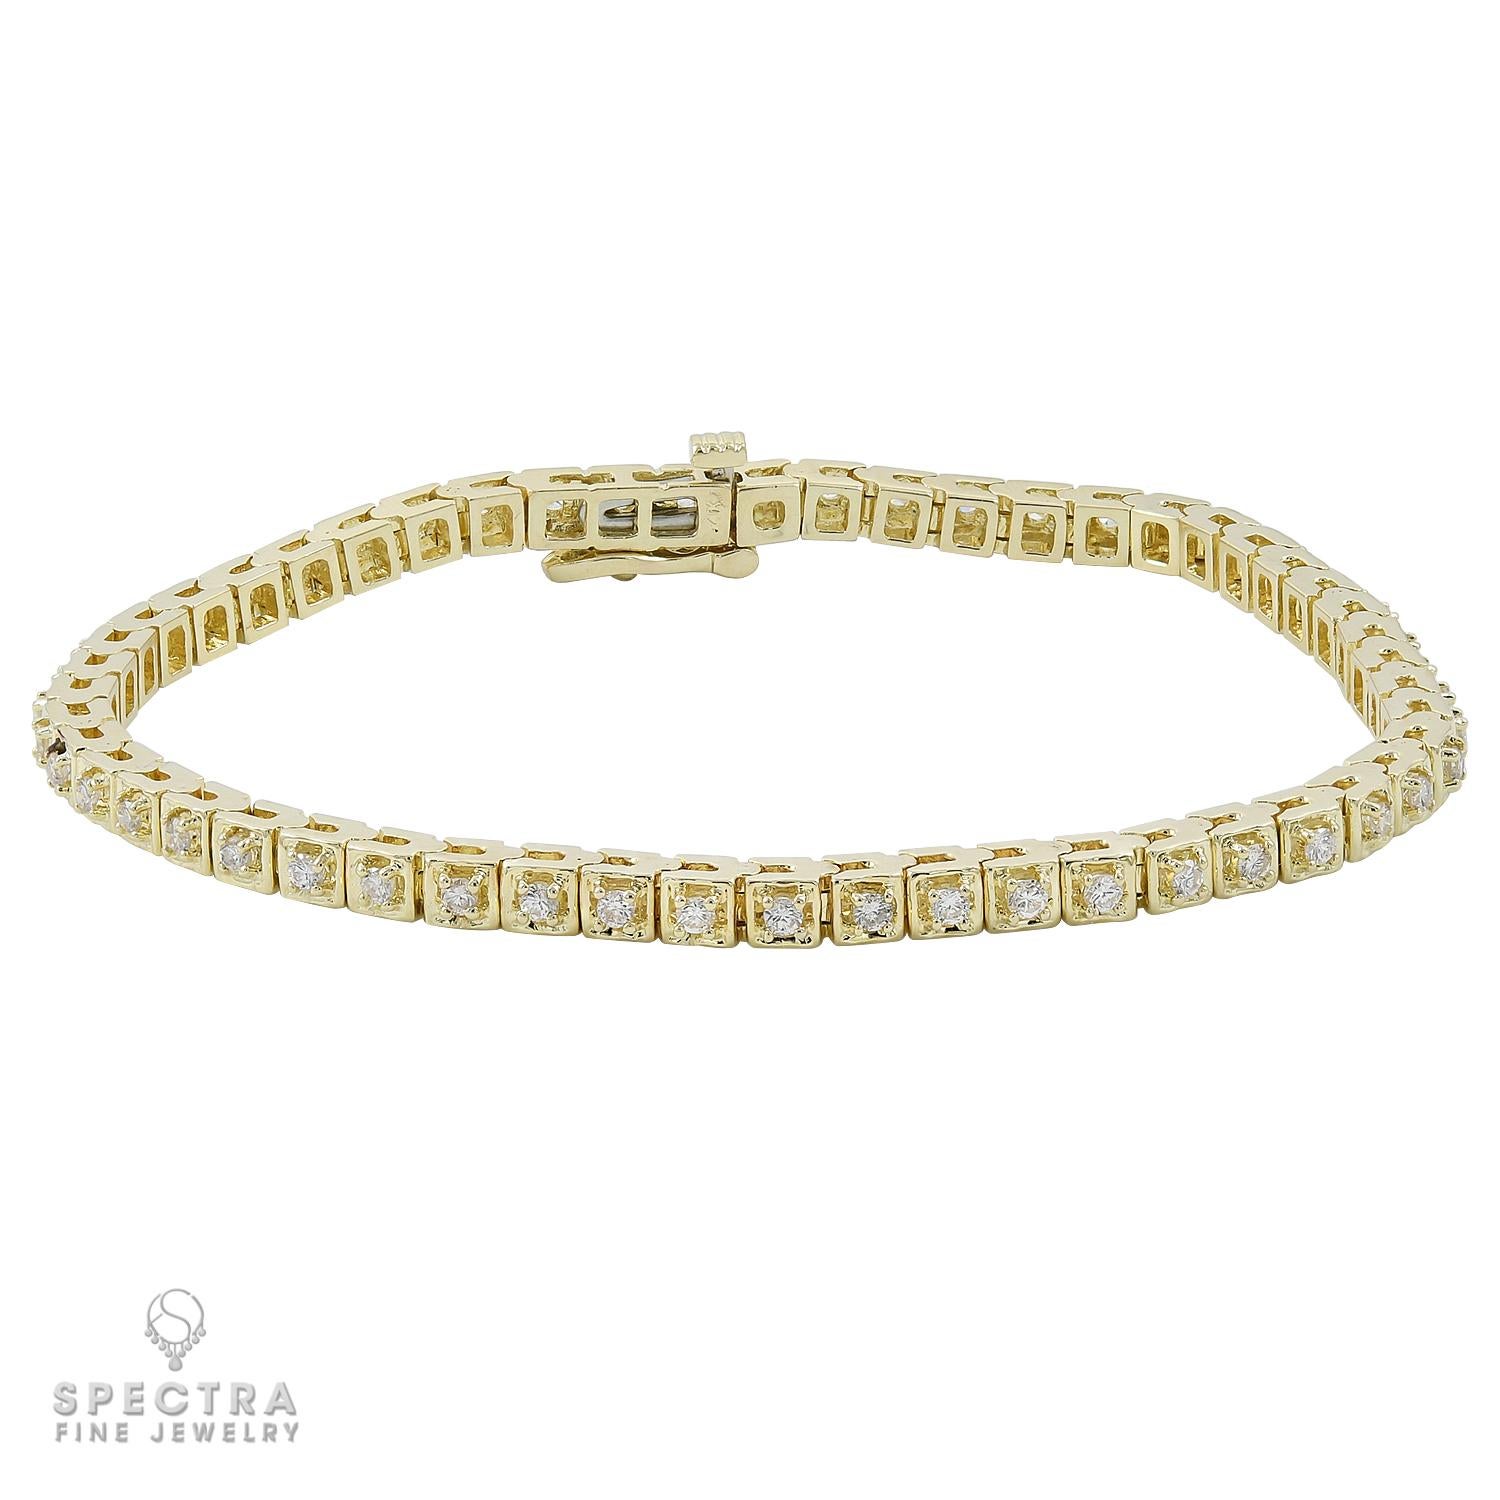 A classy tennis bracelet comprising of 52 diamonds weighing a total of 1.56 carats.
Each diamond weighs 0.03 carat.
The diamonds are not certified, most with H-I color, VS-SI clarity.
7 inches long. 
14k yellow gold, gross weight 13.83 grams.